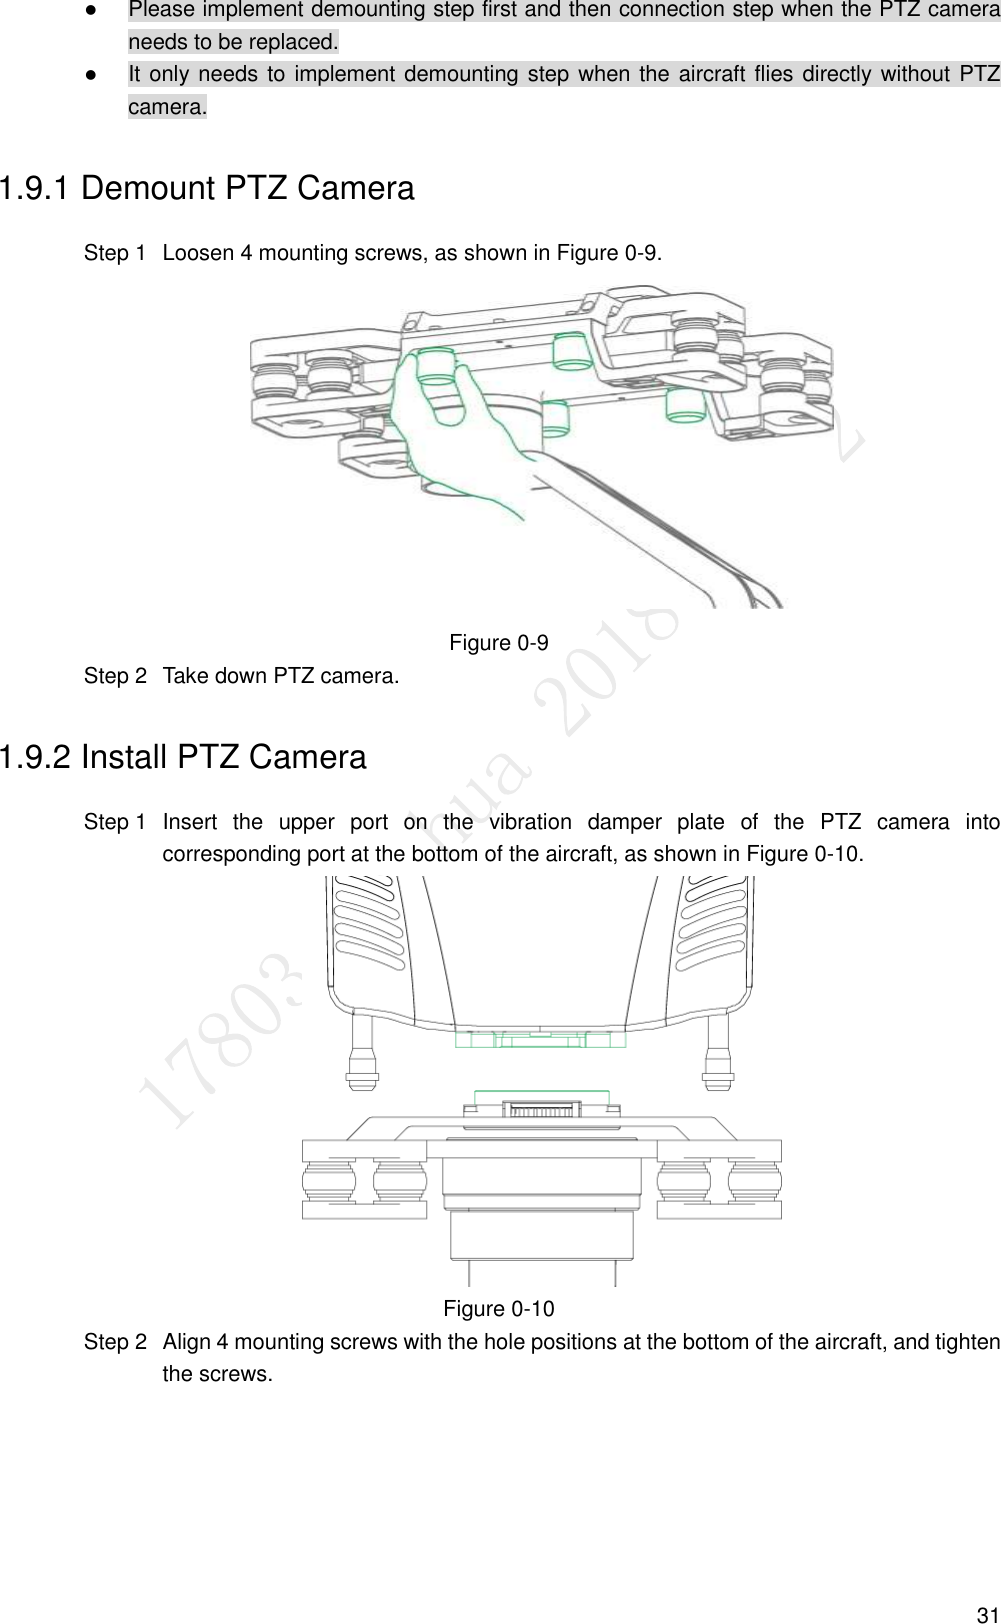  31  Please implement demounting step first and then connection step when the PTZ camera needs to be replaced.  It only needs to implement demounting step when the aircraft flies directly without PTZ camera. 1.9.1 Demount PTZ Camera   Loosen 4 mounting screws, as shown in Figure 0-9. Step 1 Figure 0-9   Take down PTZ camera. Step 21.9.2 Install PTZ Camera   Insert  the  upper  port  on  the  vibration  damper  plate  of  the  PTZ  camera  into Step 1corresponding port at the bottom of the aircraft, as shown in Figure 0-10.  Figure 0-10   Align 4 mounting screws with the hole positions at the bottom of the aircraft, and tighten Step 2the screws. 